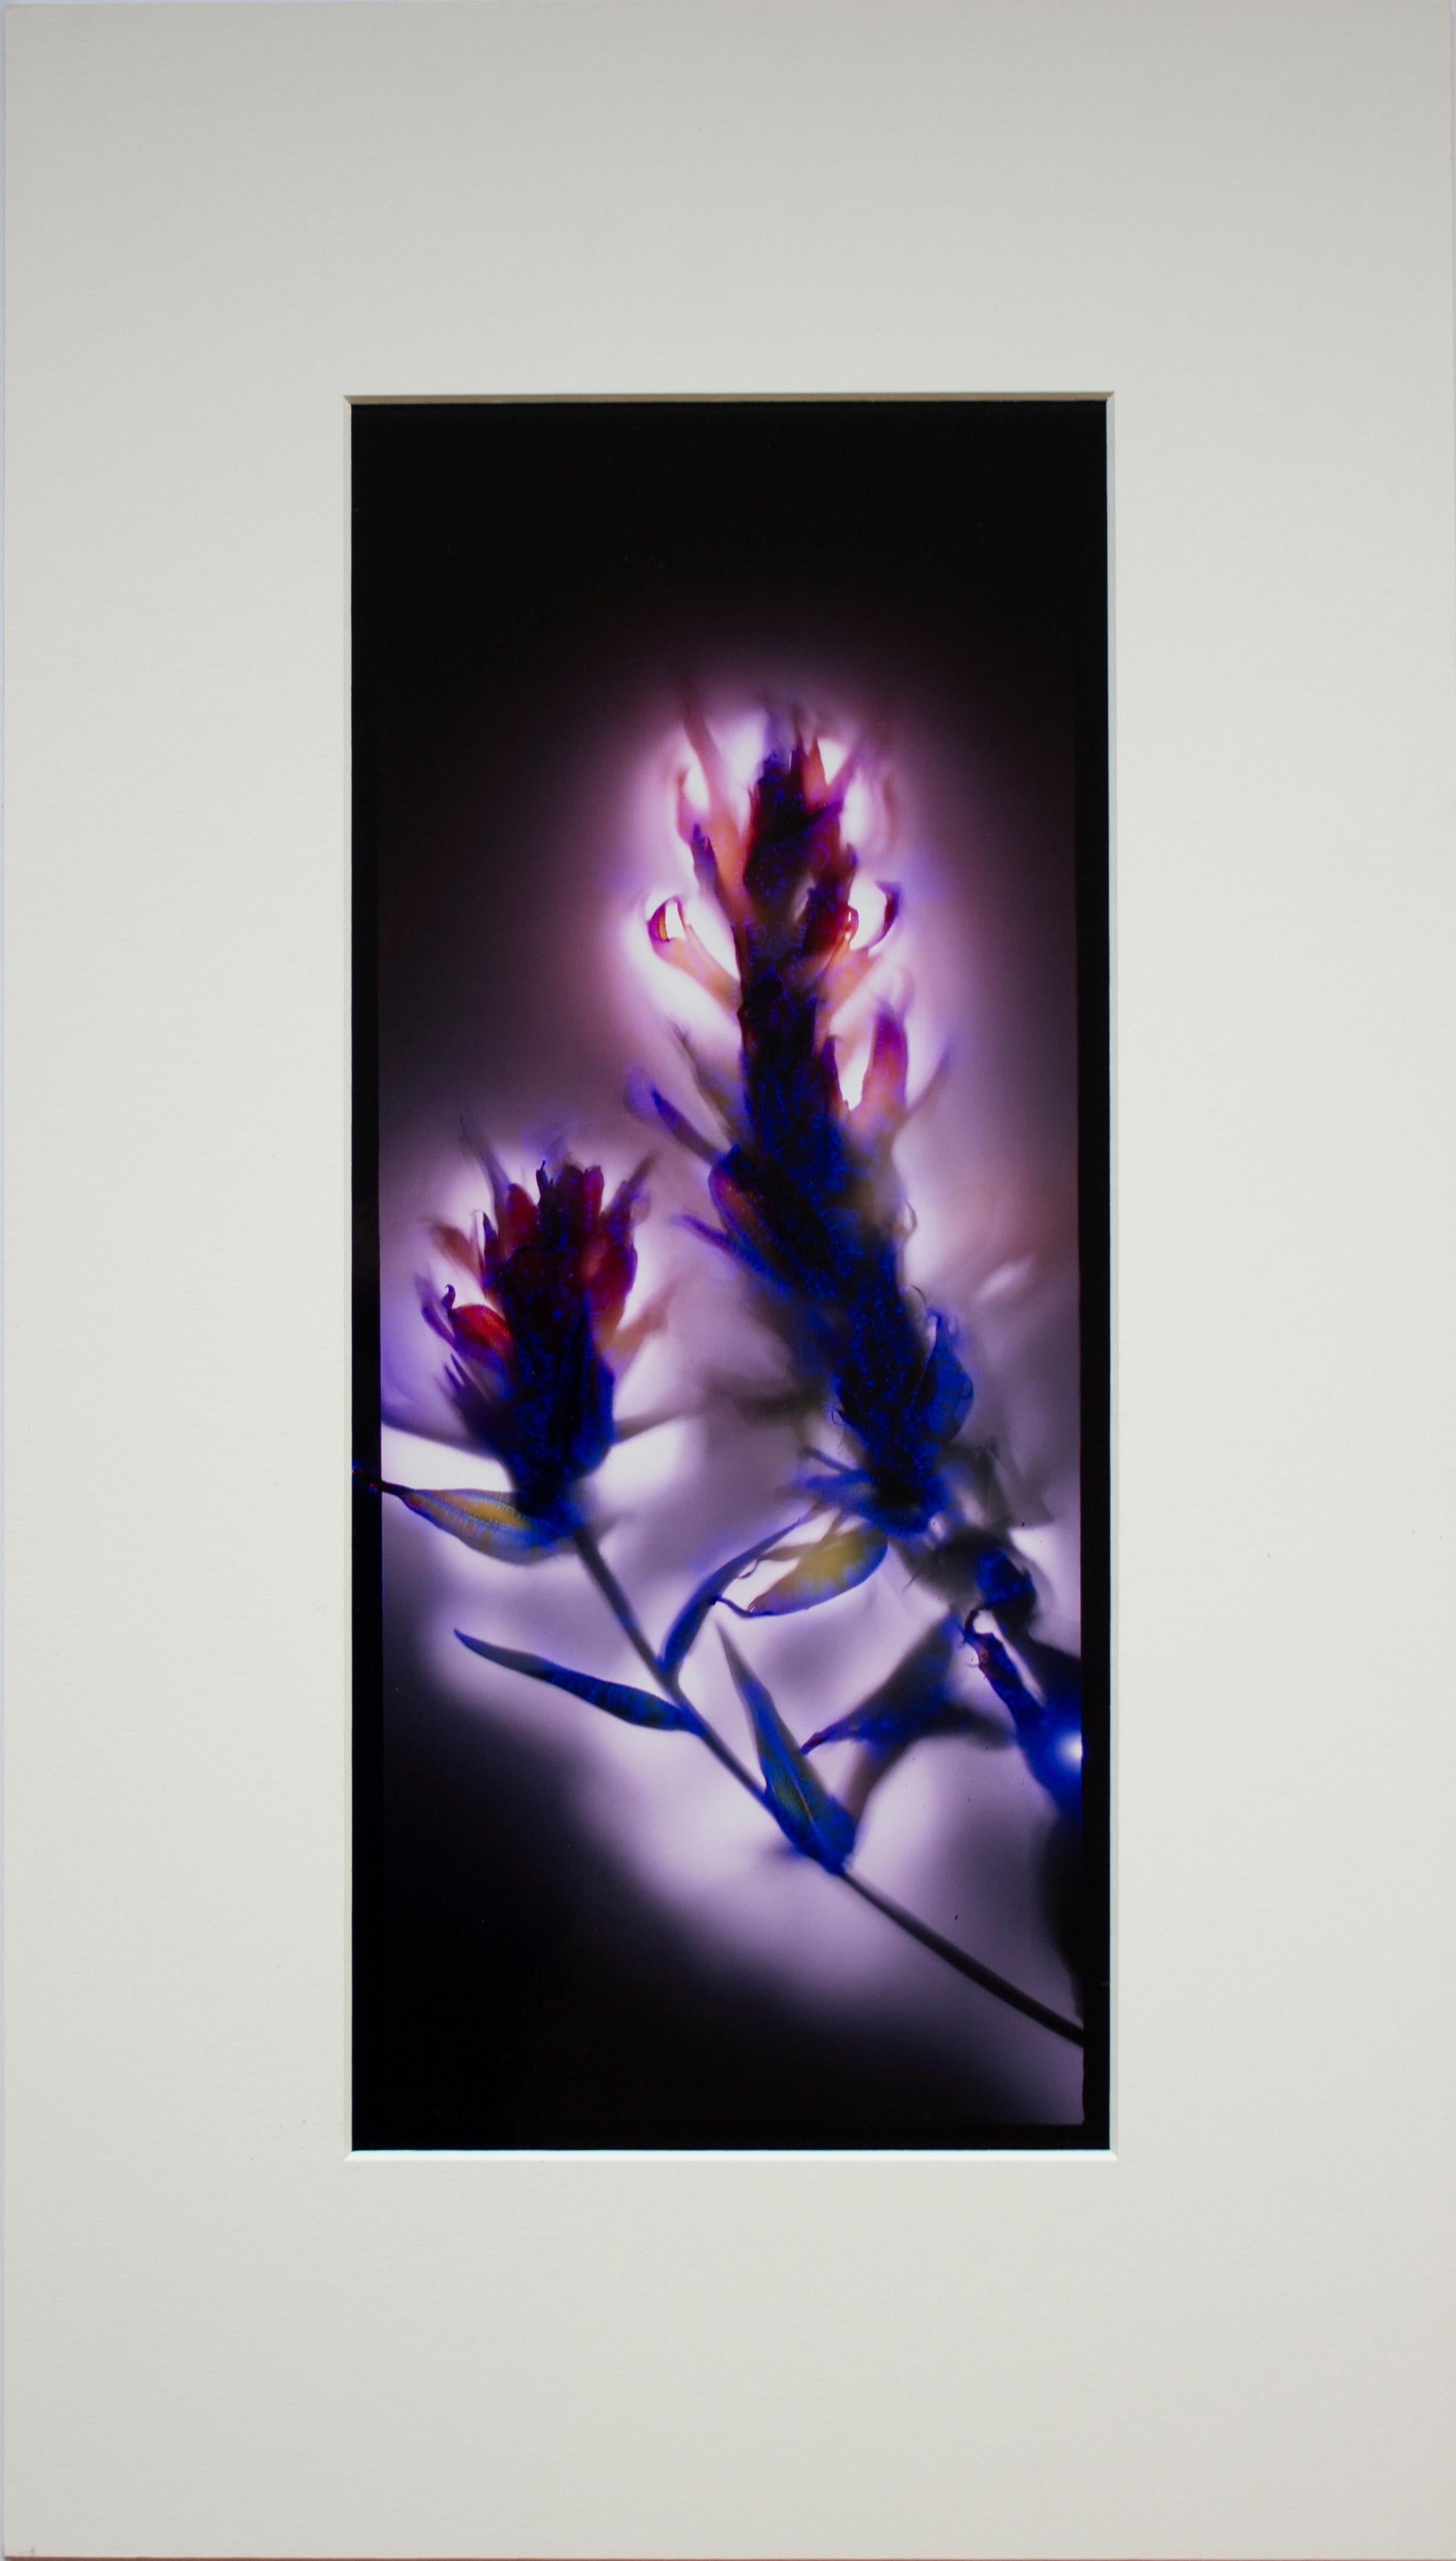 A vertical cameraless photographic print of an Indian Paintbrush flower in brilliant purple, pink, and white by Robert Buelteman. Buelteman, originally a traditional landscape photographer, sought to expand the photographic tradition and capture the